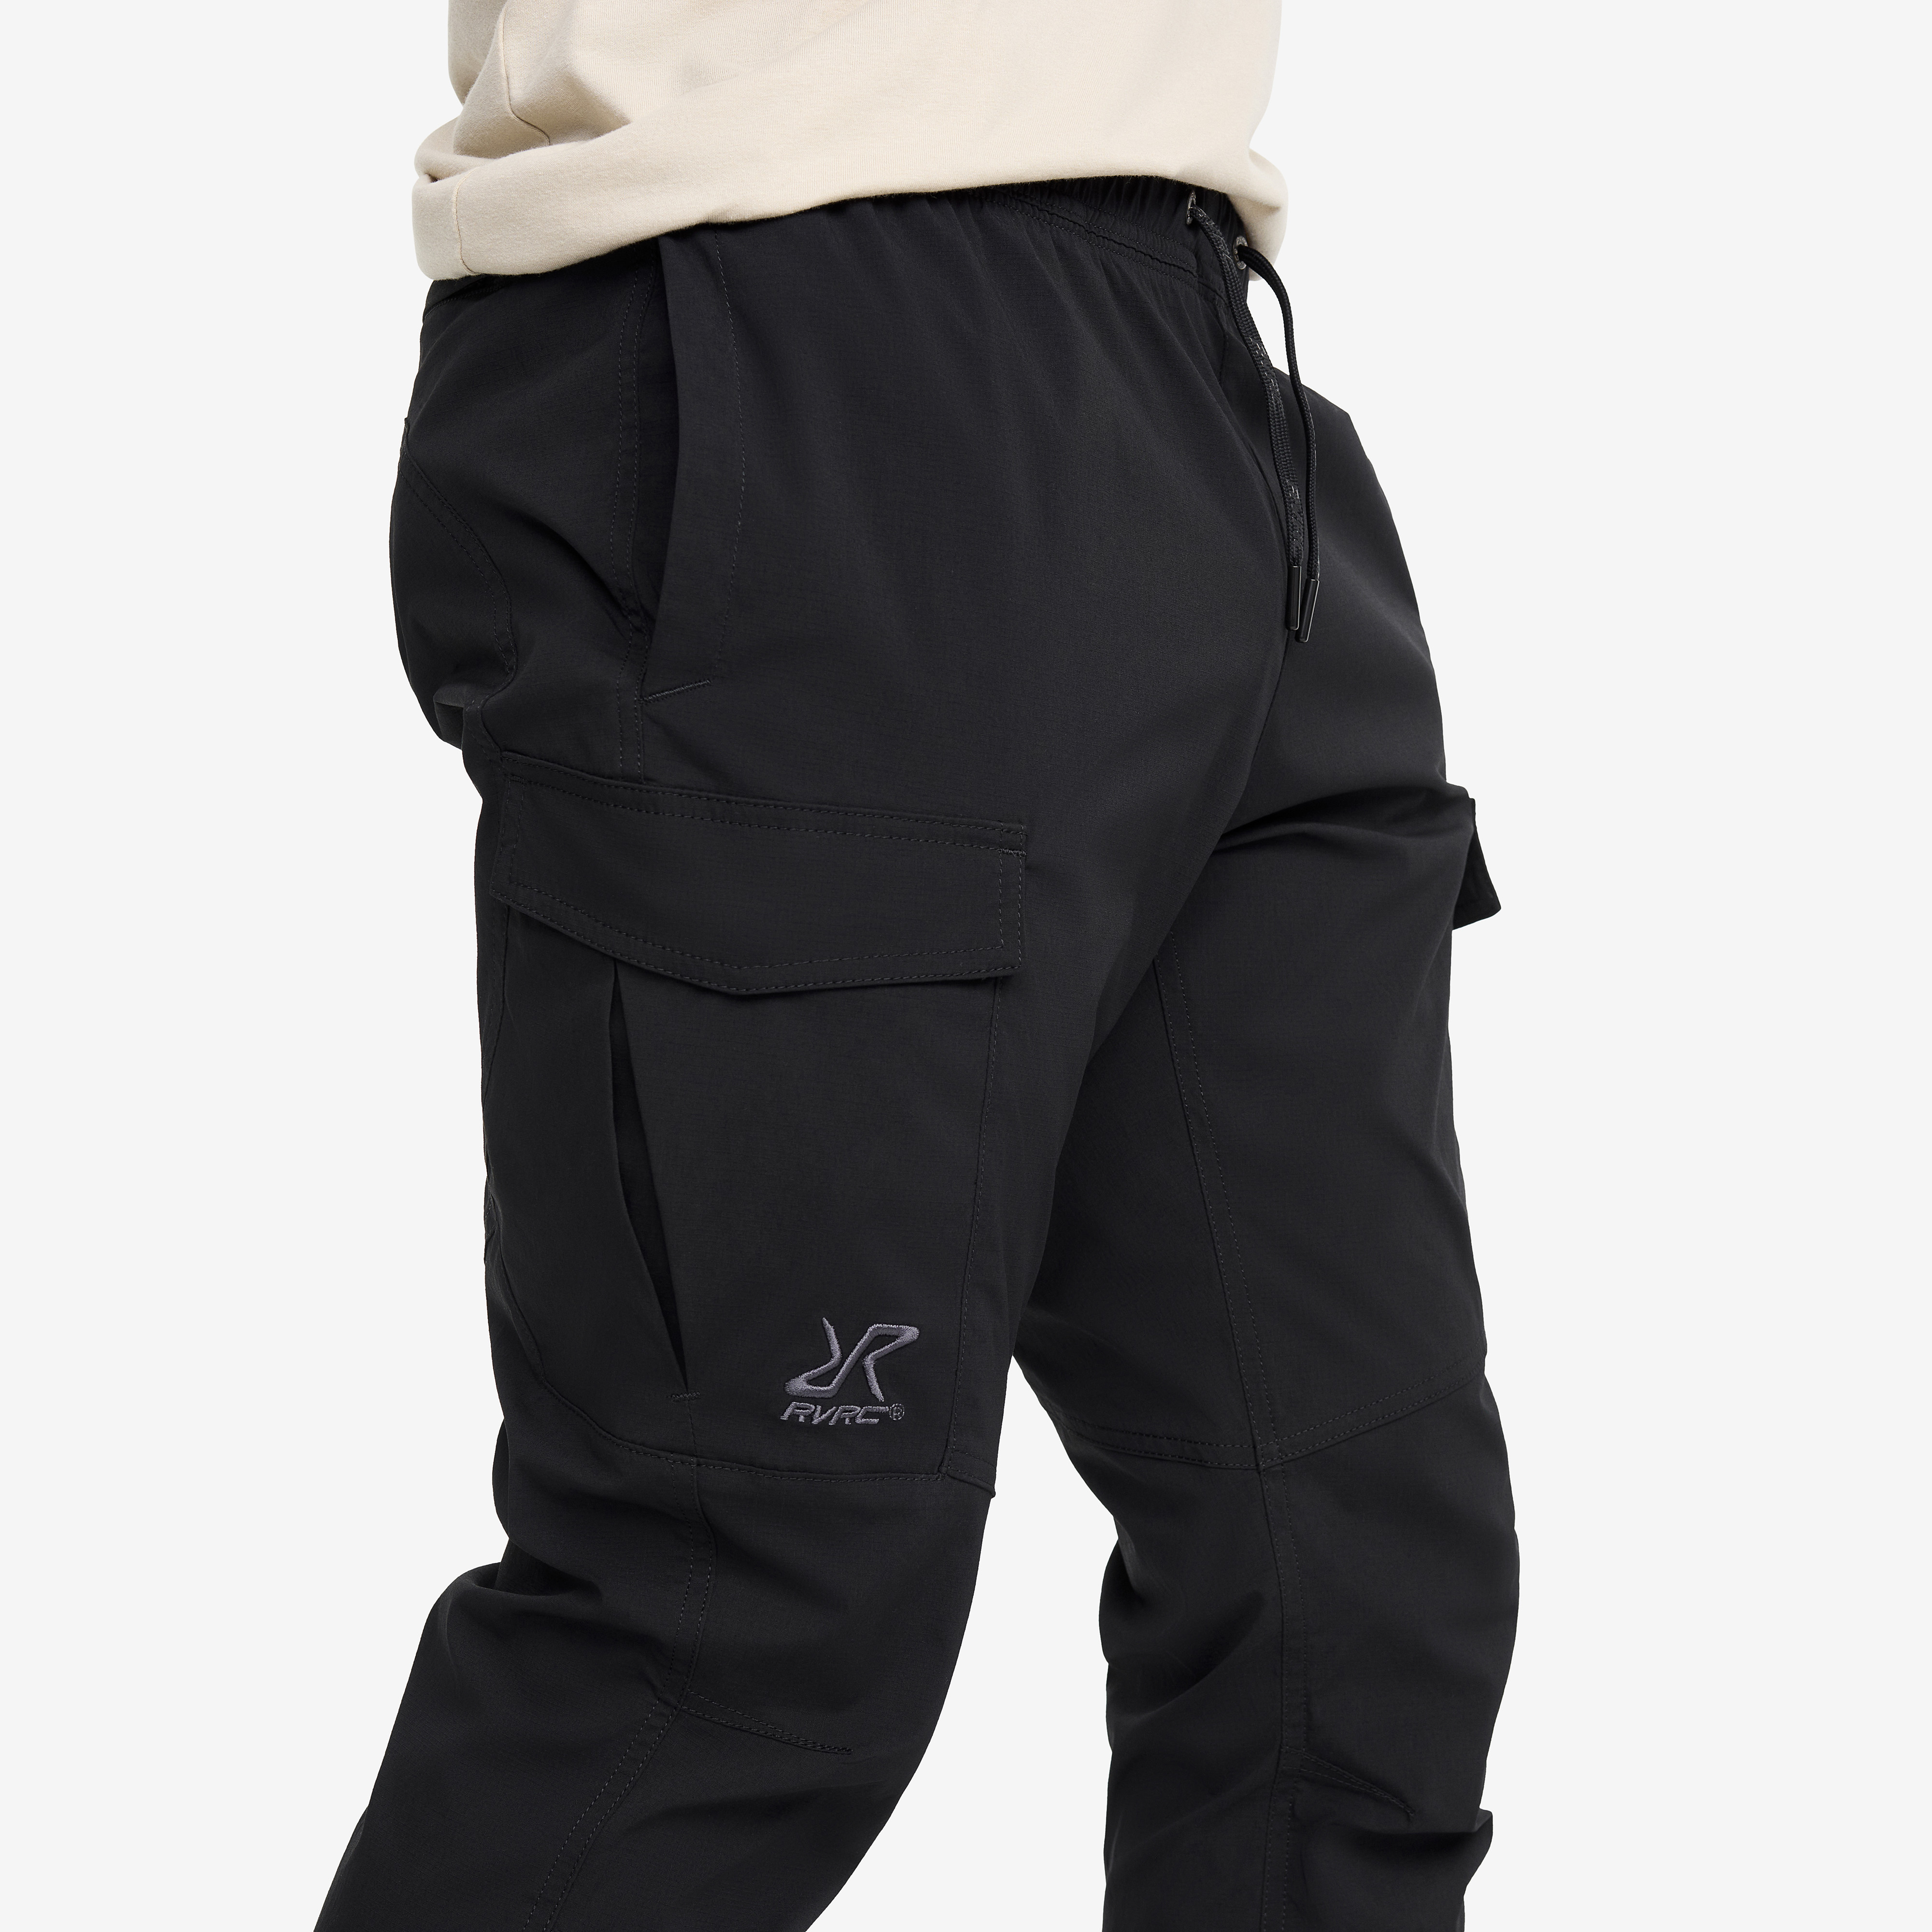 cargo pants with adjustable strings｜TikTok Search